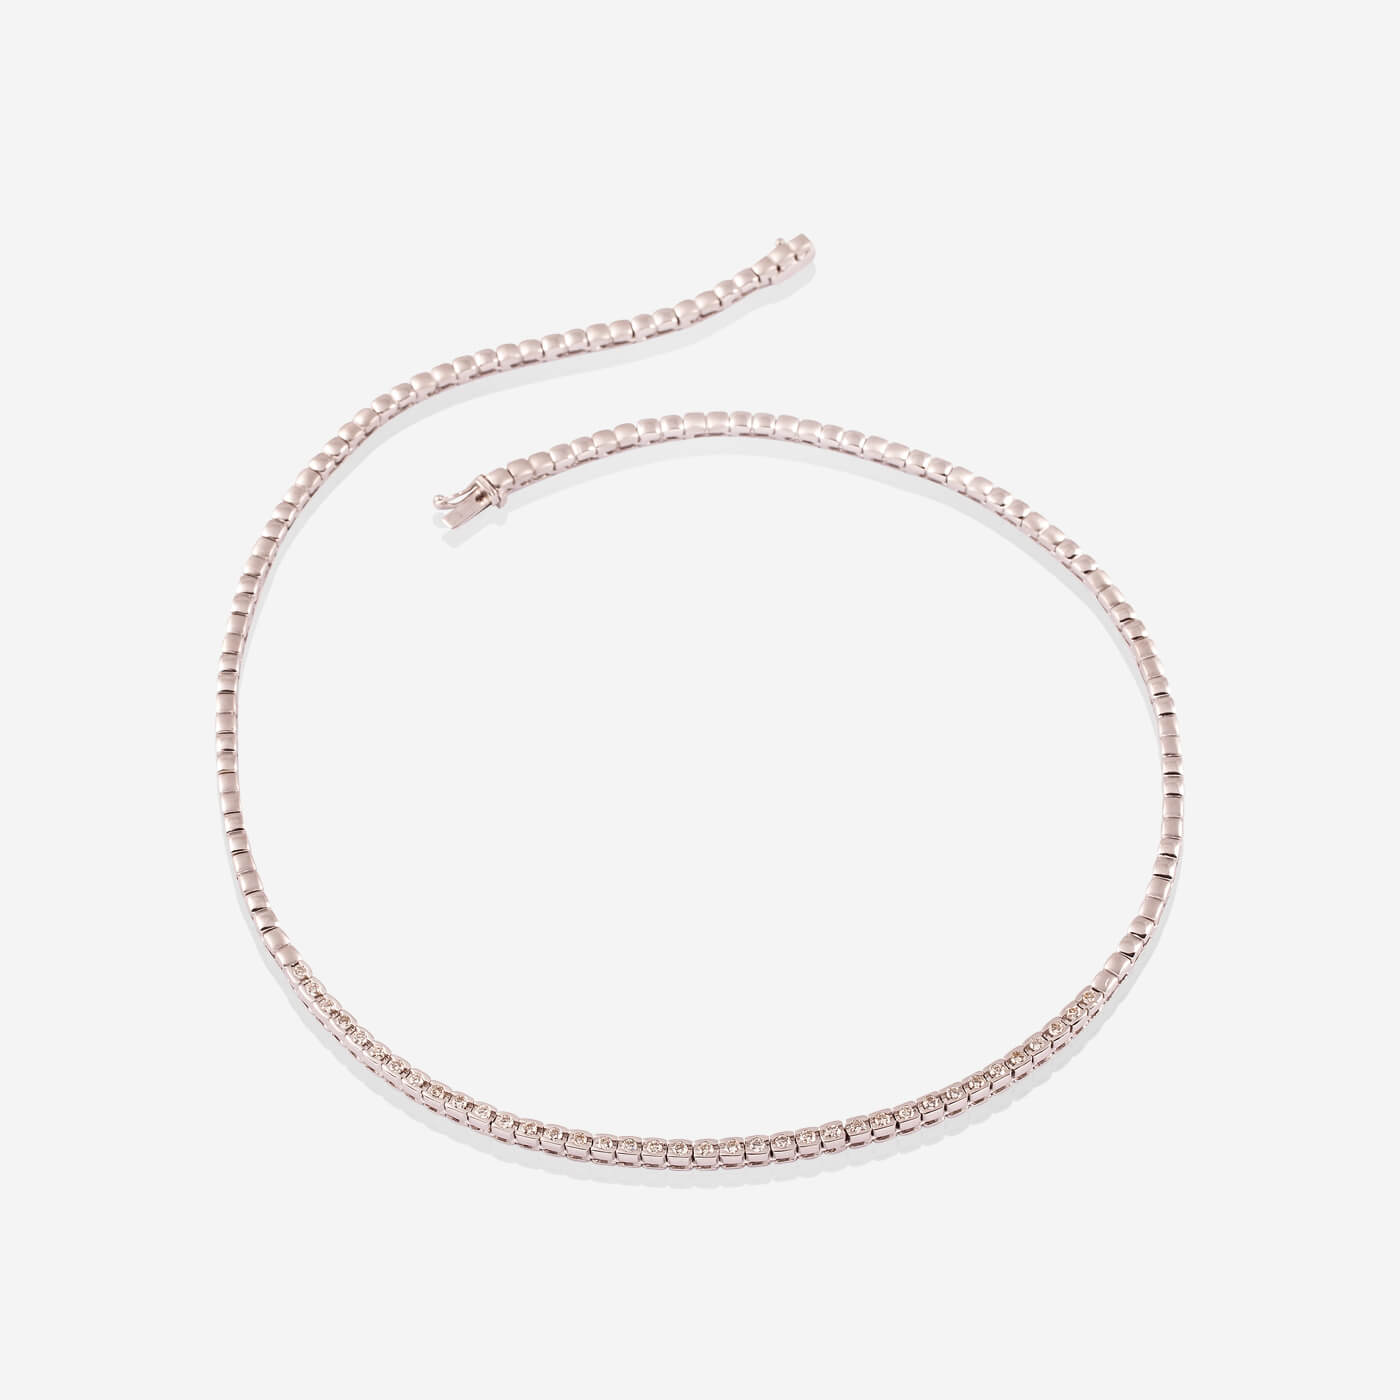 White Gold With Diamonds Tennis Necklace - Ref: KG00059